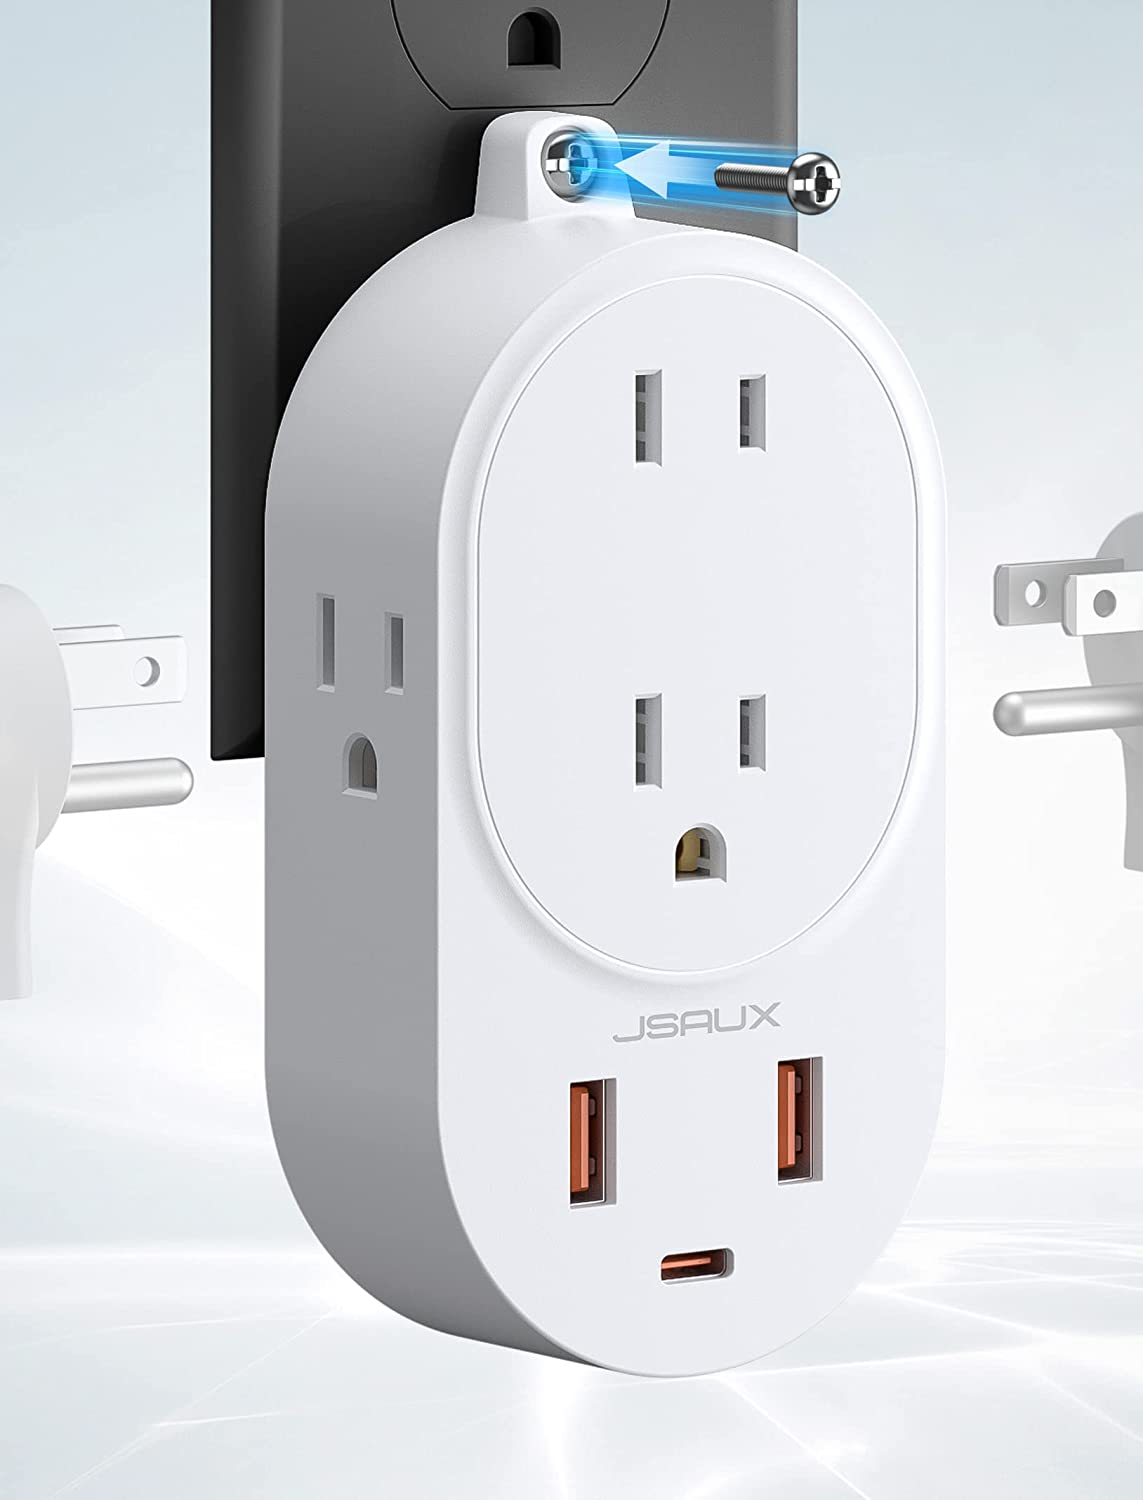 Amazon.com: Outlet Splitter, JSAUX Multi Plug Outlet Extender with USB C (20W PD), 3 Prong Wall Plug Outlet with USB Ports Travel Multi Outlet Wall Plug Adapter $8.99